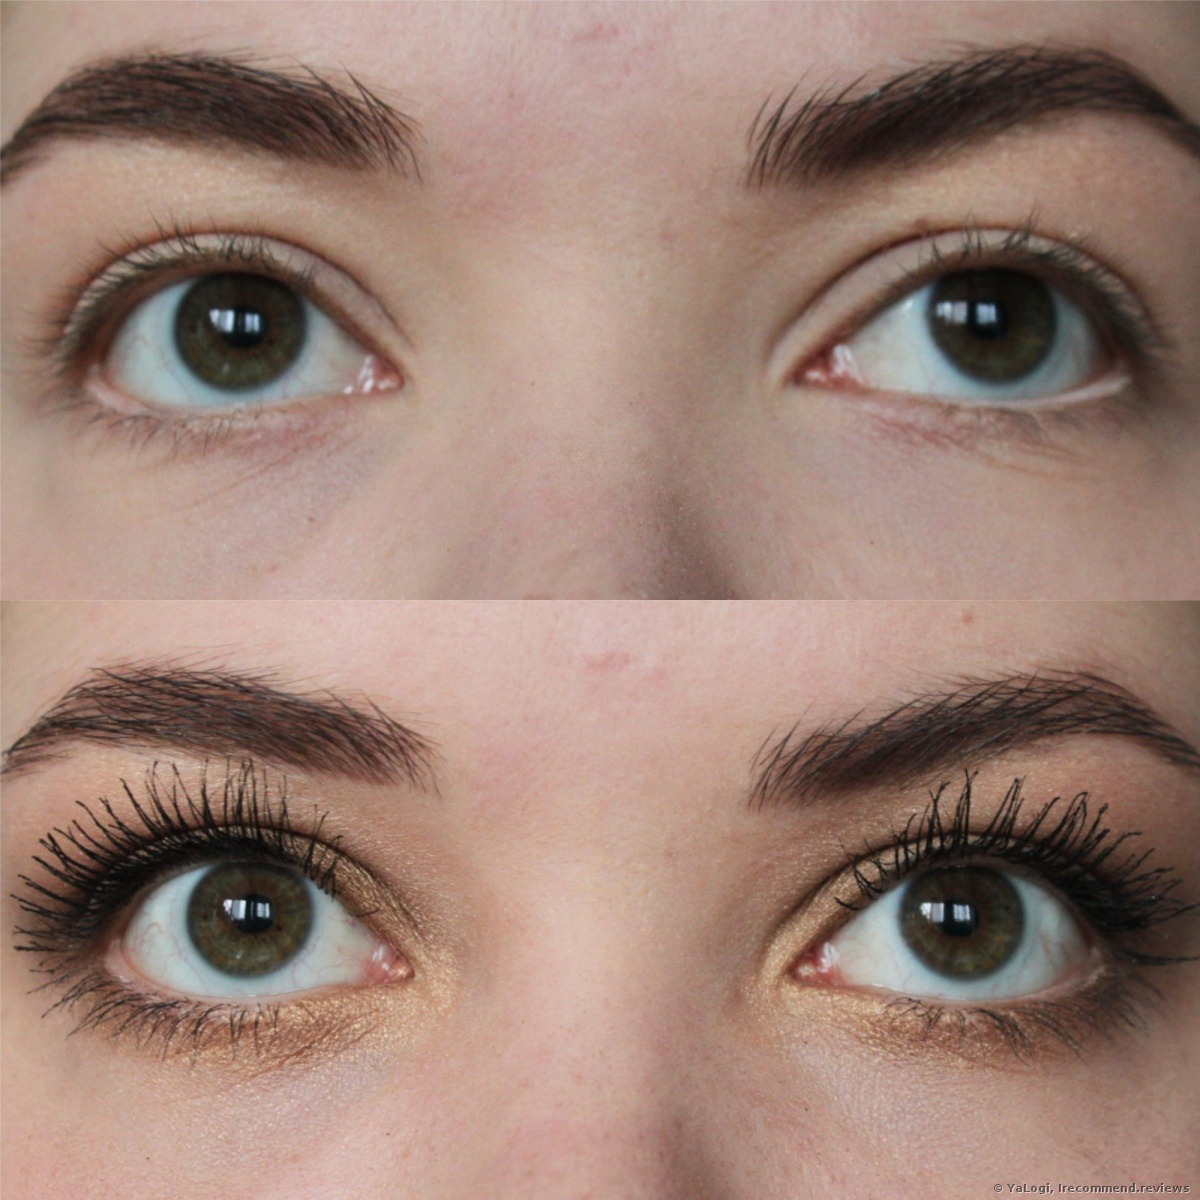 The reviews » never it Waterproof shots - Consumer | is awesome. but mascara the Worth «Is Mascara really good Hype NYX This BEFORE/AFTER worth hype?